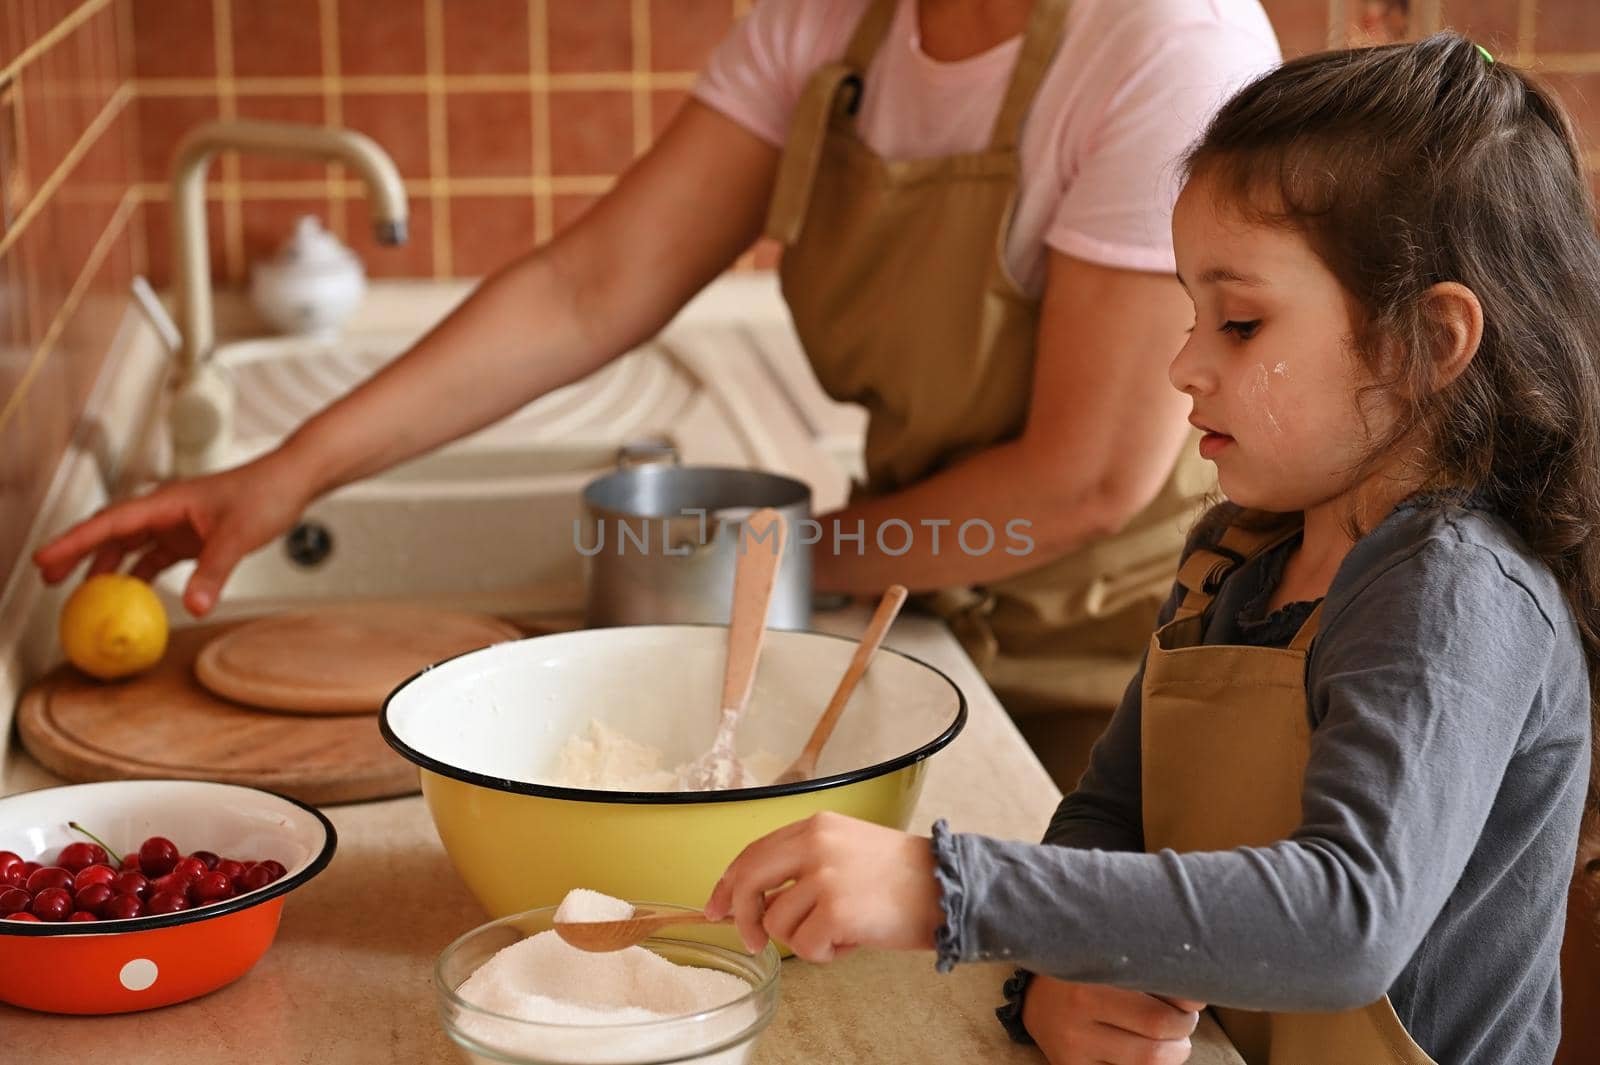 Beautiful little girl, adorable lovely daughter in chef's apron, adding scoop of sugar into a bowl with dry ingredients, preparing dough with her mother in home kitchen. Culinary and baking concept